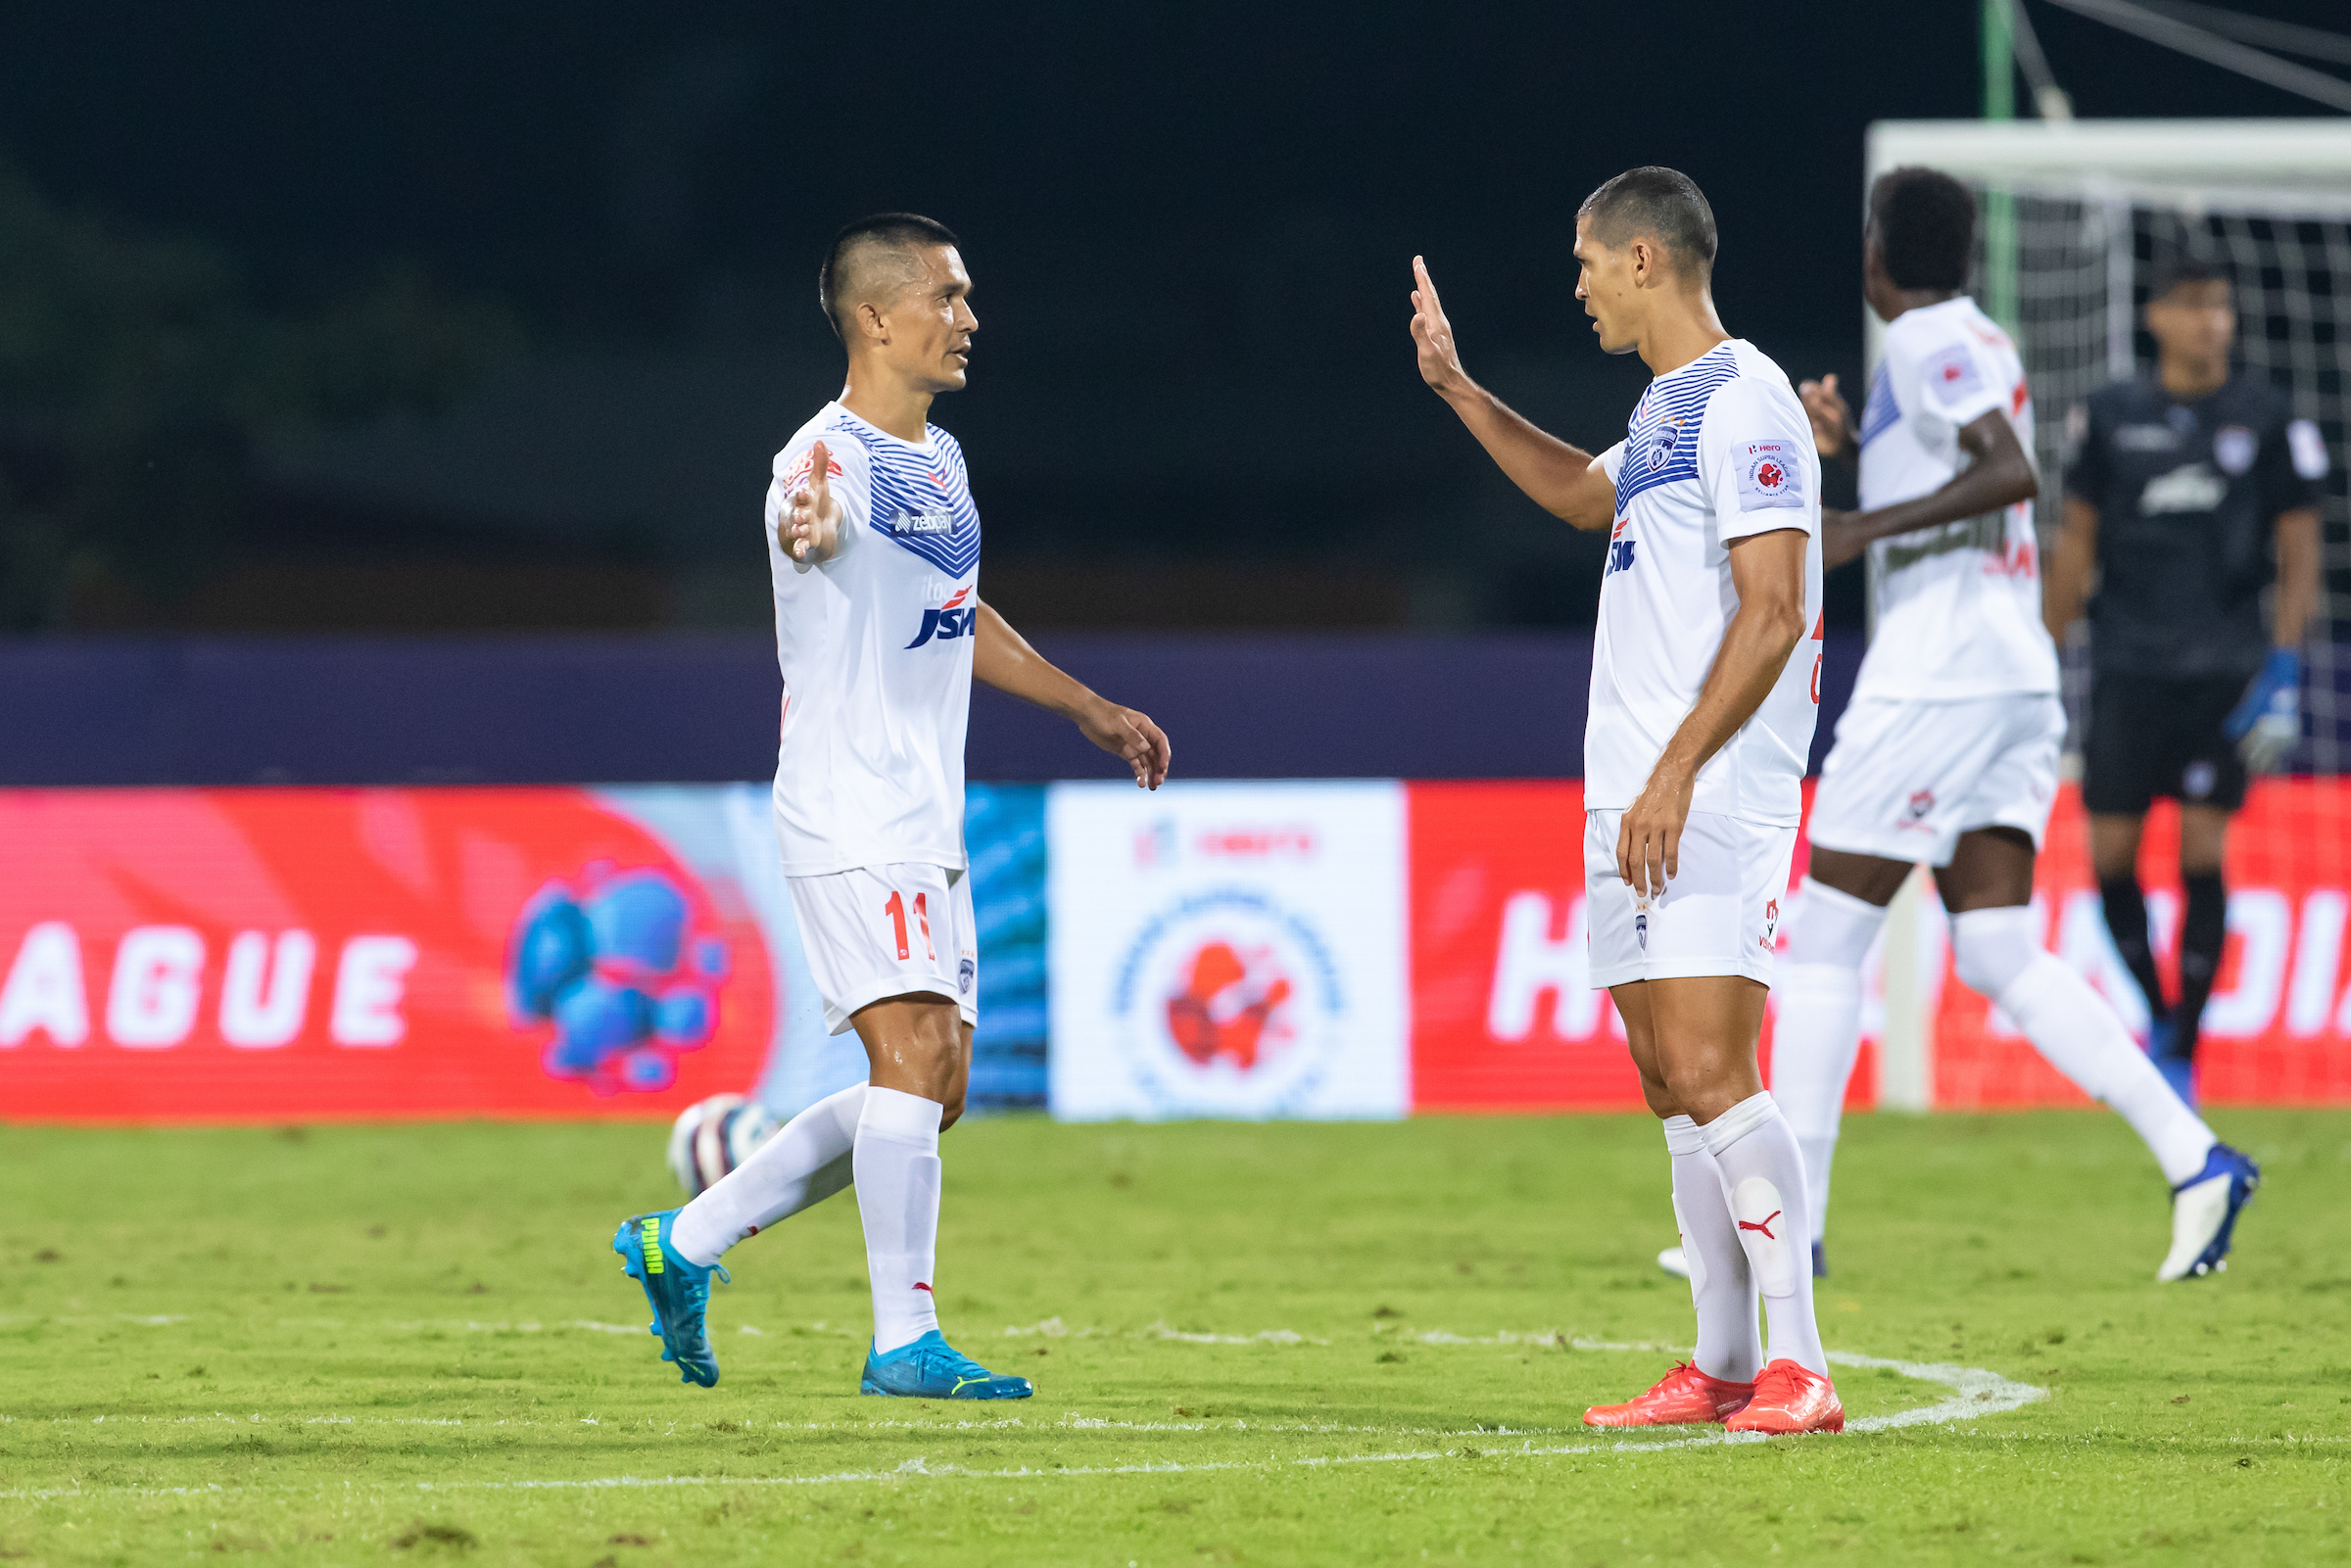 NEU beat BFC: Brown, Danmawia on target as NorthEast United come from behind to trump Bengaluru FC